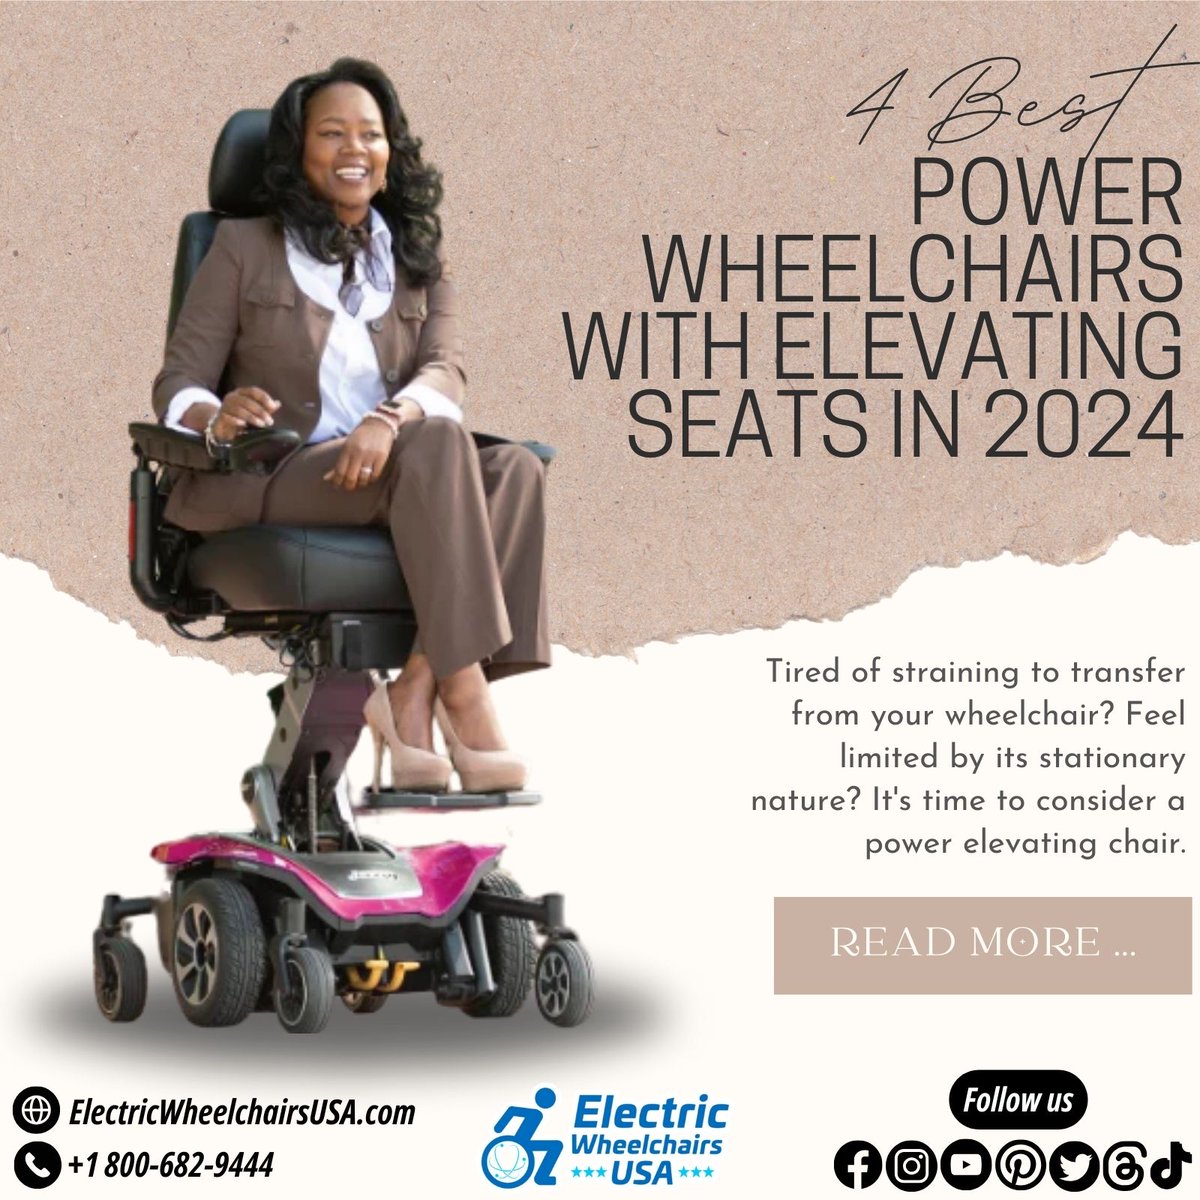 Unlock freedom with a power elevating chair! 🌟 Reach new heights effortlessly.

Learn more here 👇 electricwheelchairsusa.com/blogs/news/bes… 

 #ElectricWheelchairsUSA #WheelchairFreedom #ElevateYourLife #AccessibleLiving #PowerChairPerks #LimitlessMobility #EmpowerWithElevation